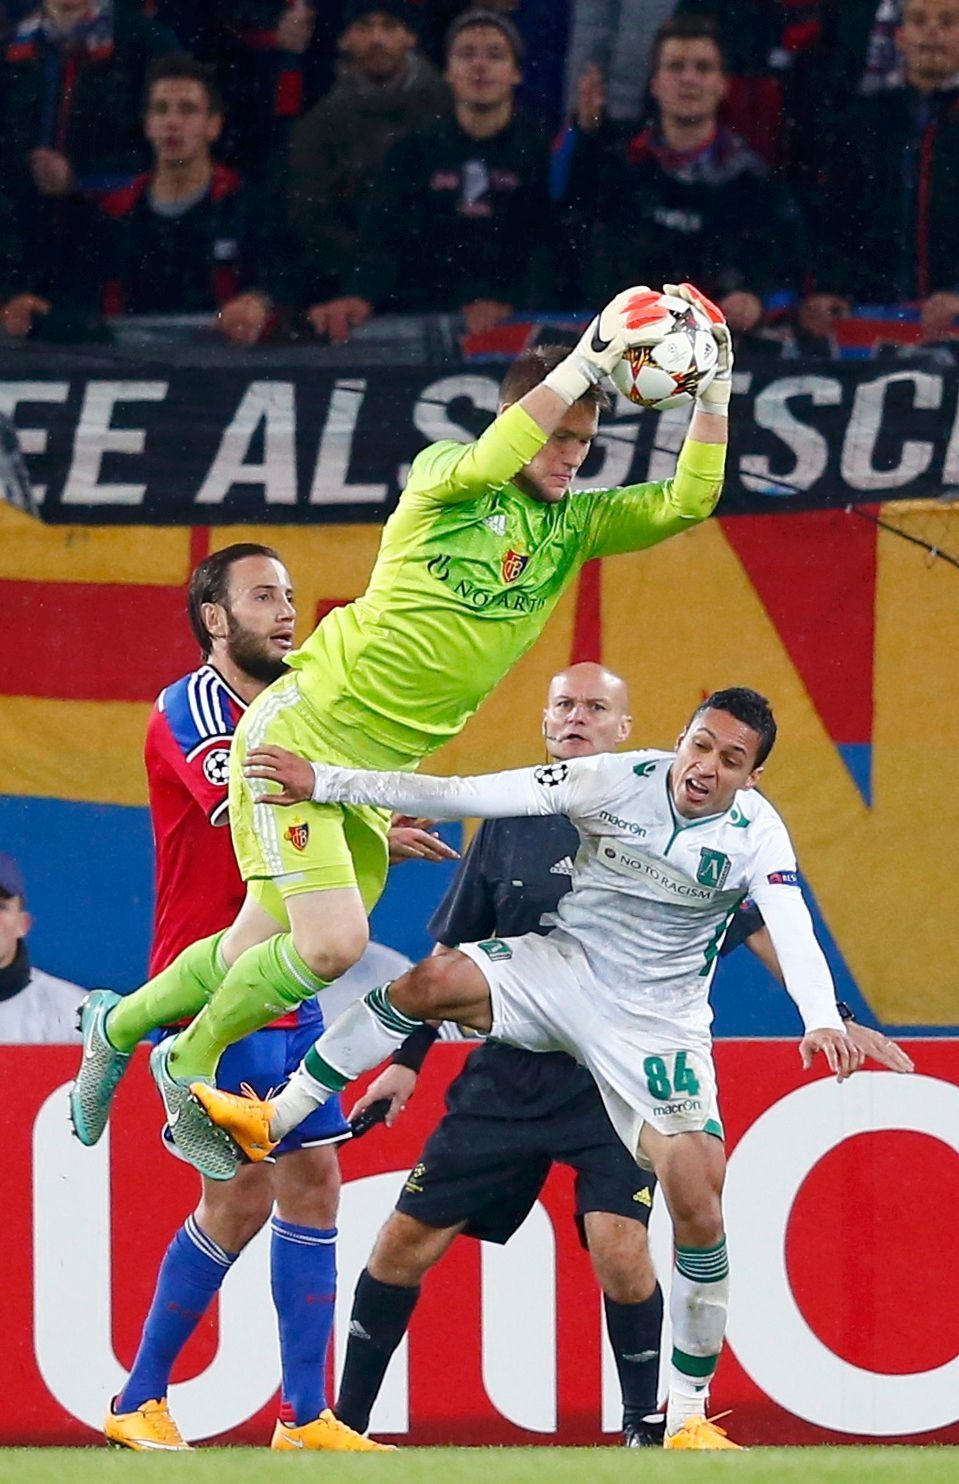 FC Basel's goalkeeper Vaclik saves in front of Marcelinho of Ludogorets during Champions League match in Basel